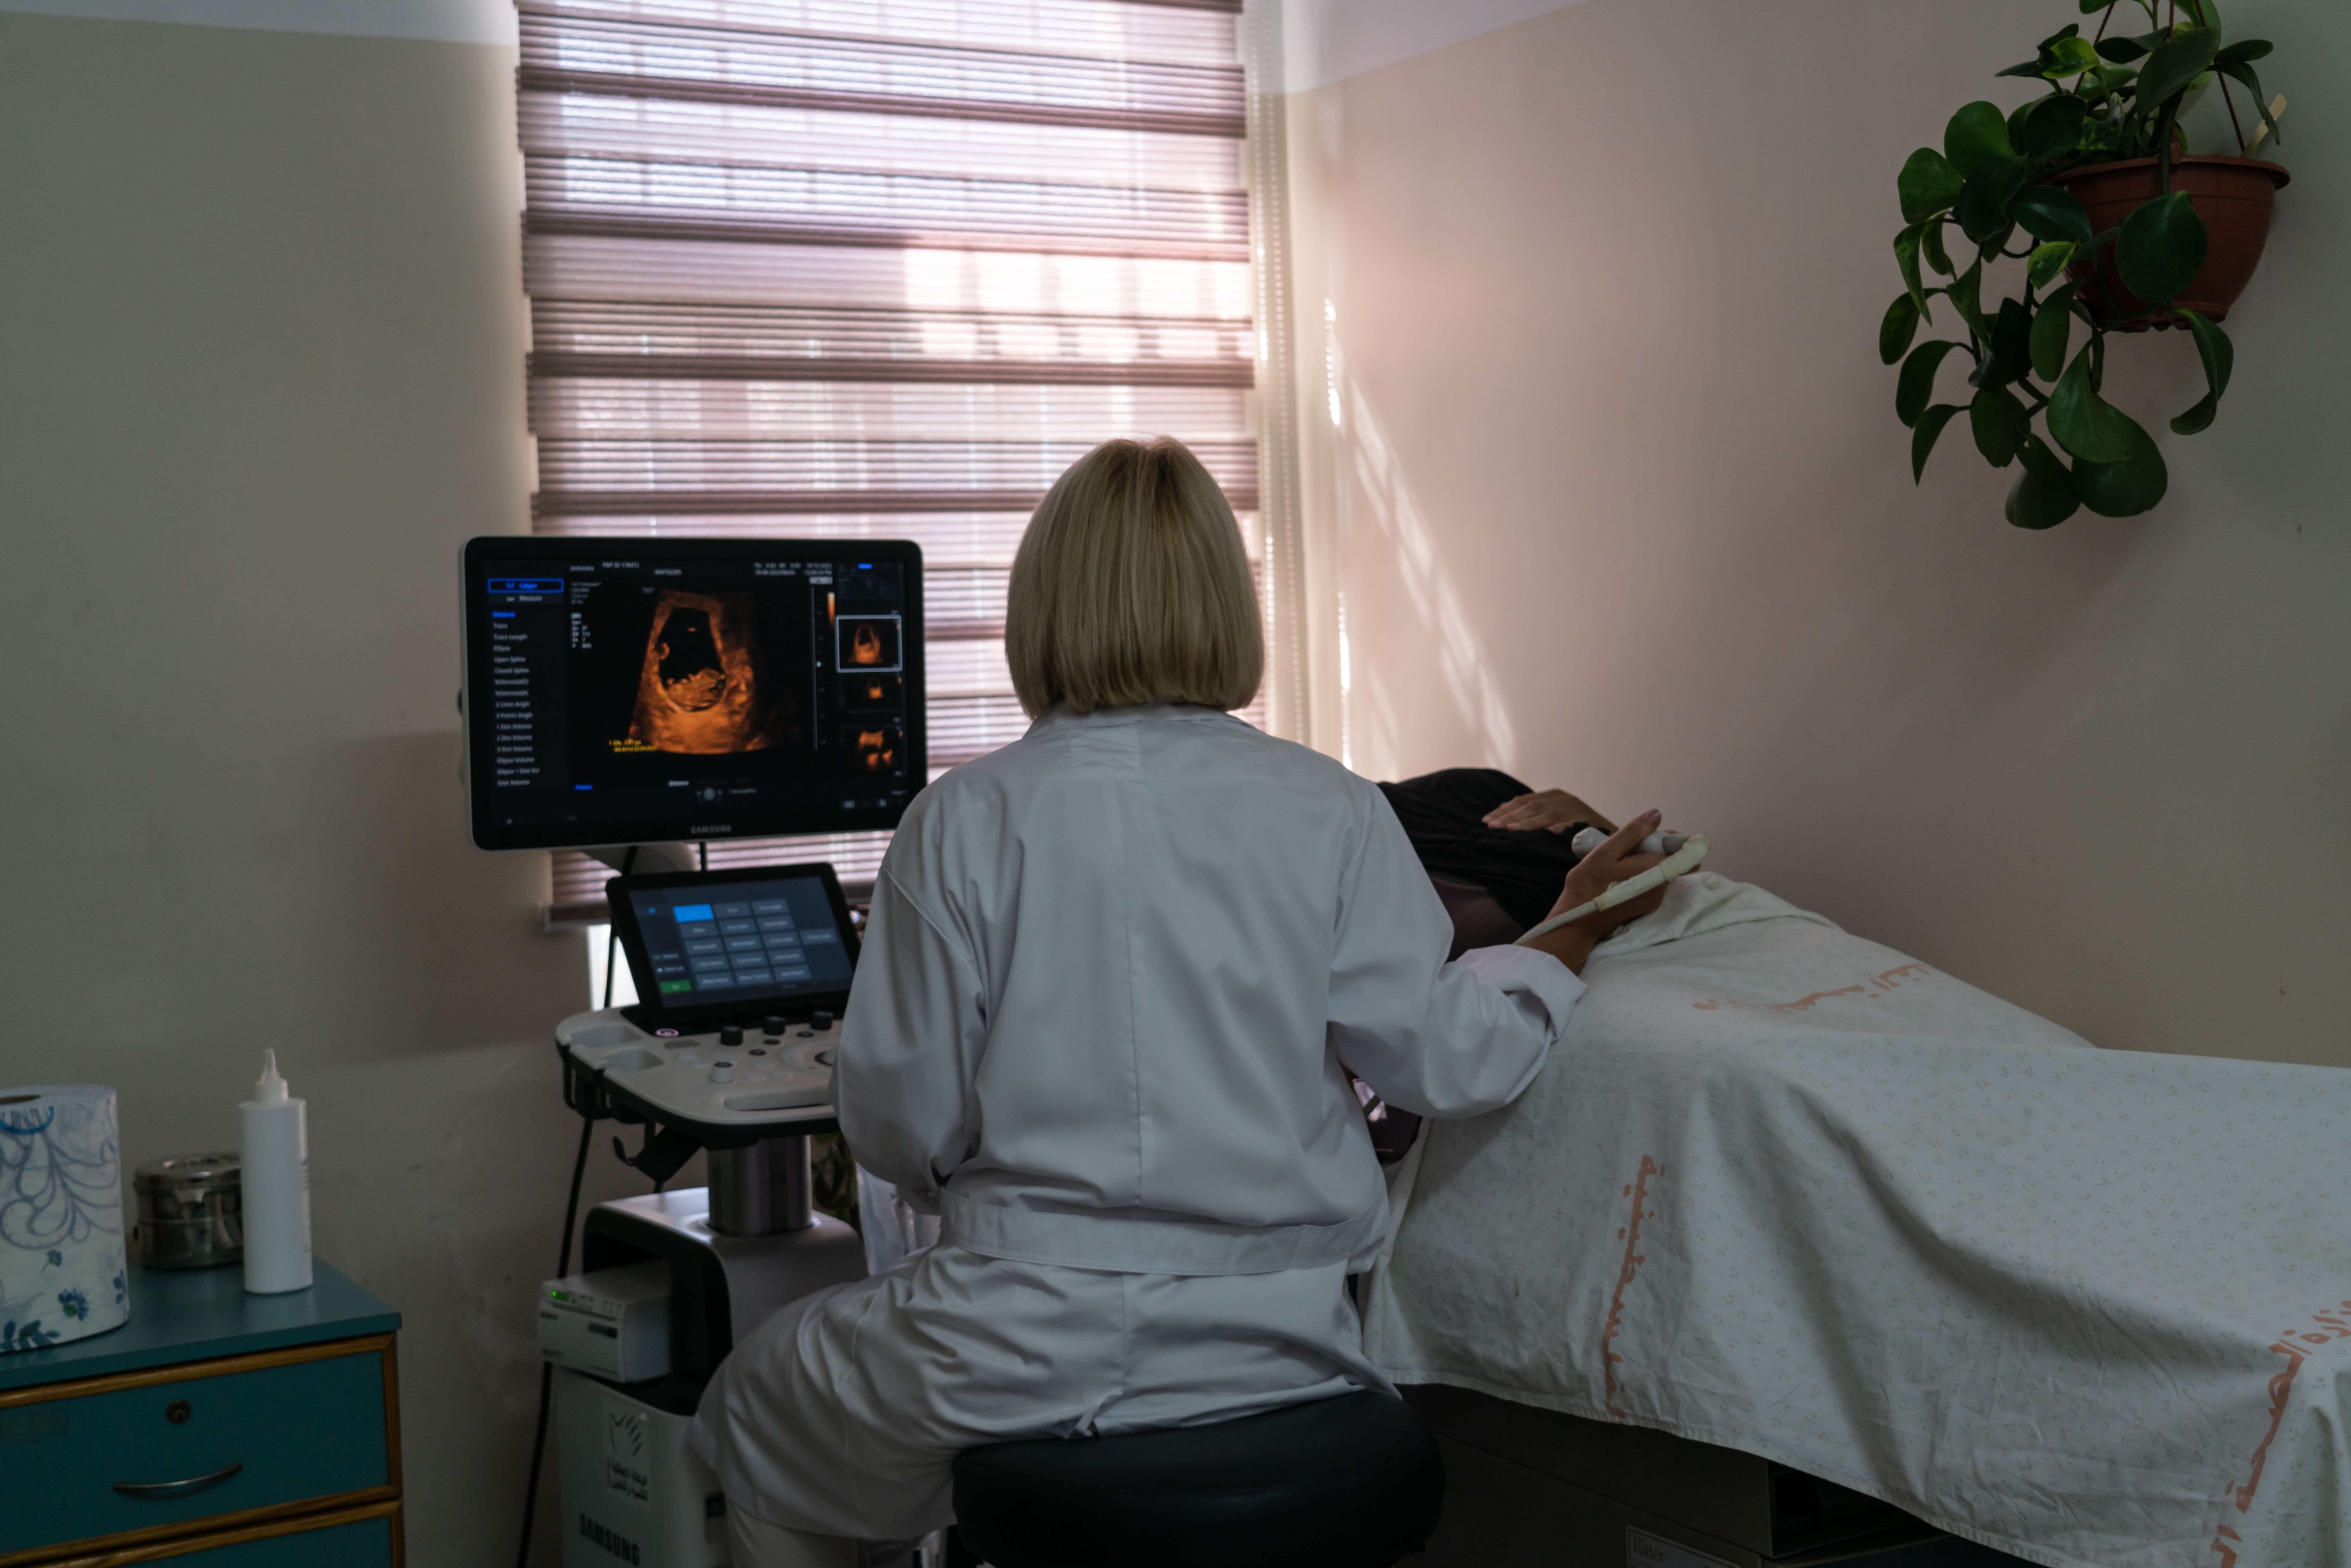 A pregnant woman visits a Ministry of Health facility in Bethlehem for her first ultrasound. © UNFPA Palestine / Samar Hazboun 